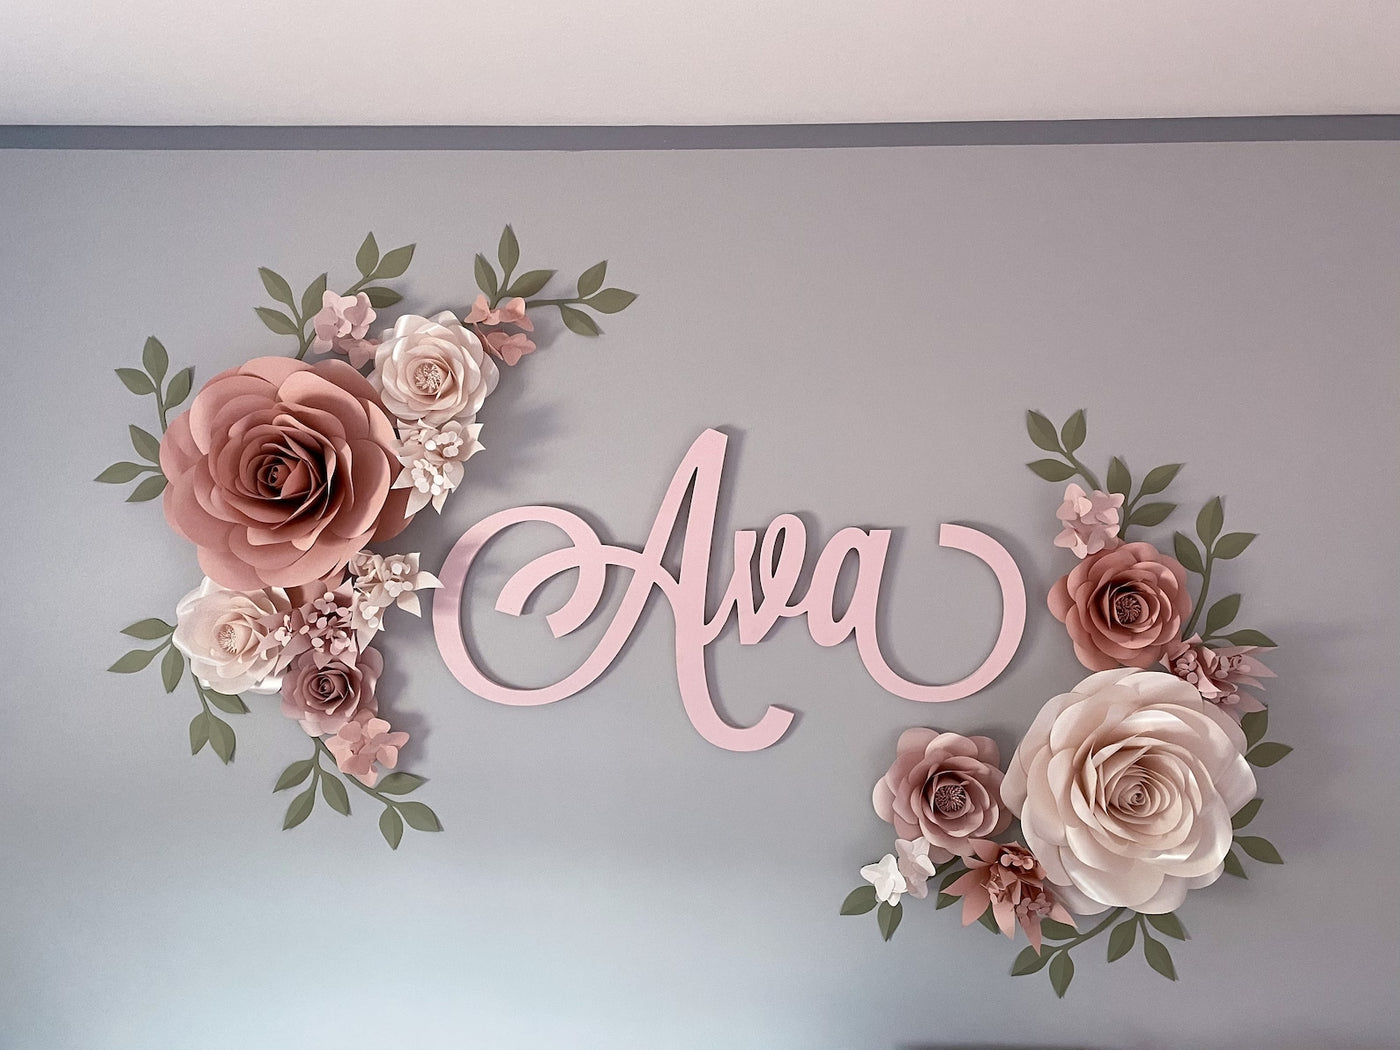 Paper flower  hanging above the crib in the nursery, creating a soothing and enchanting atmosphere for the little one